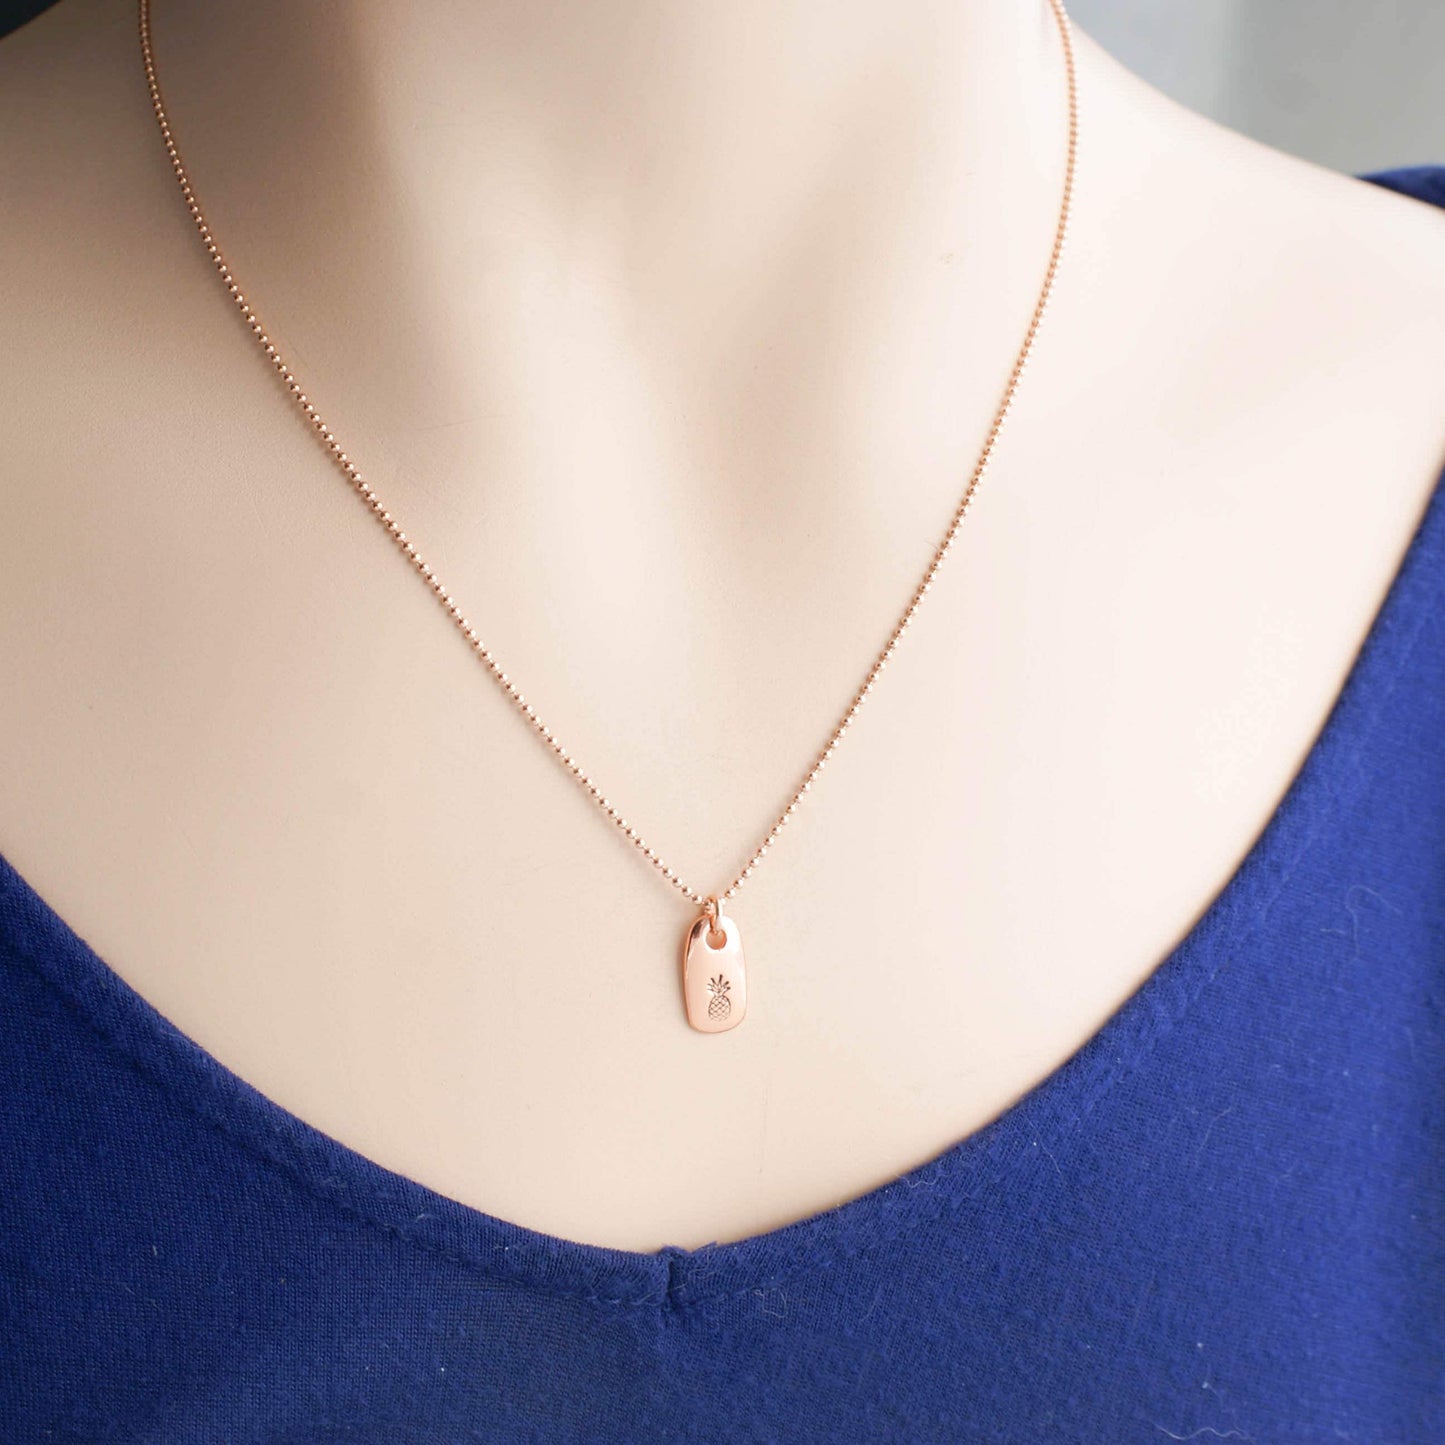 Dainty rose gold pineapple necklace on neck